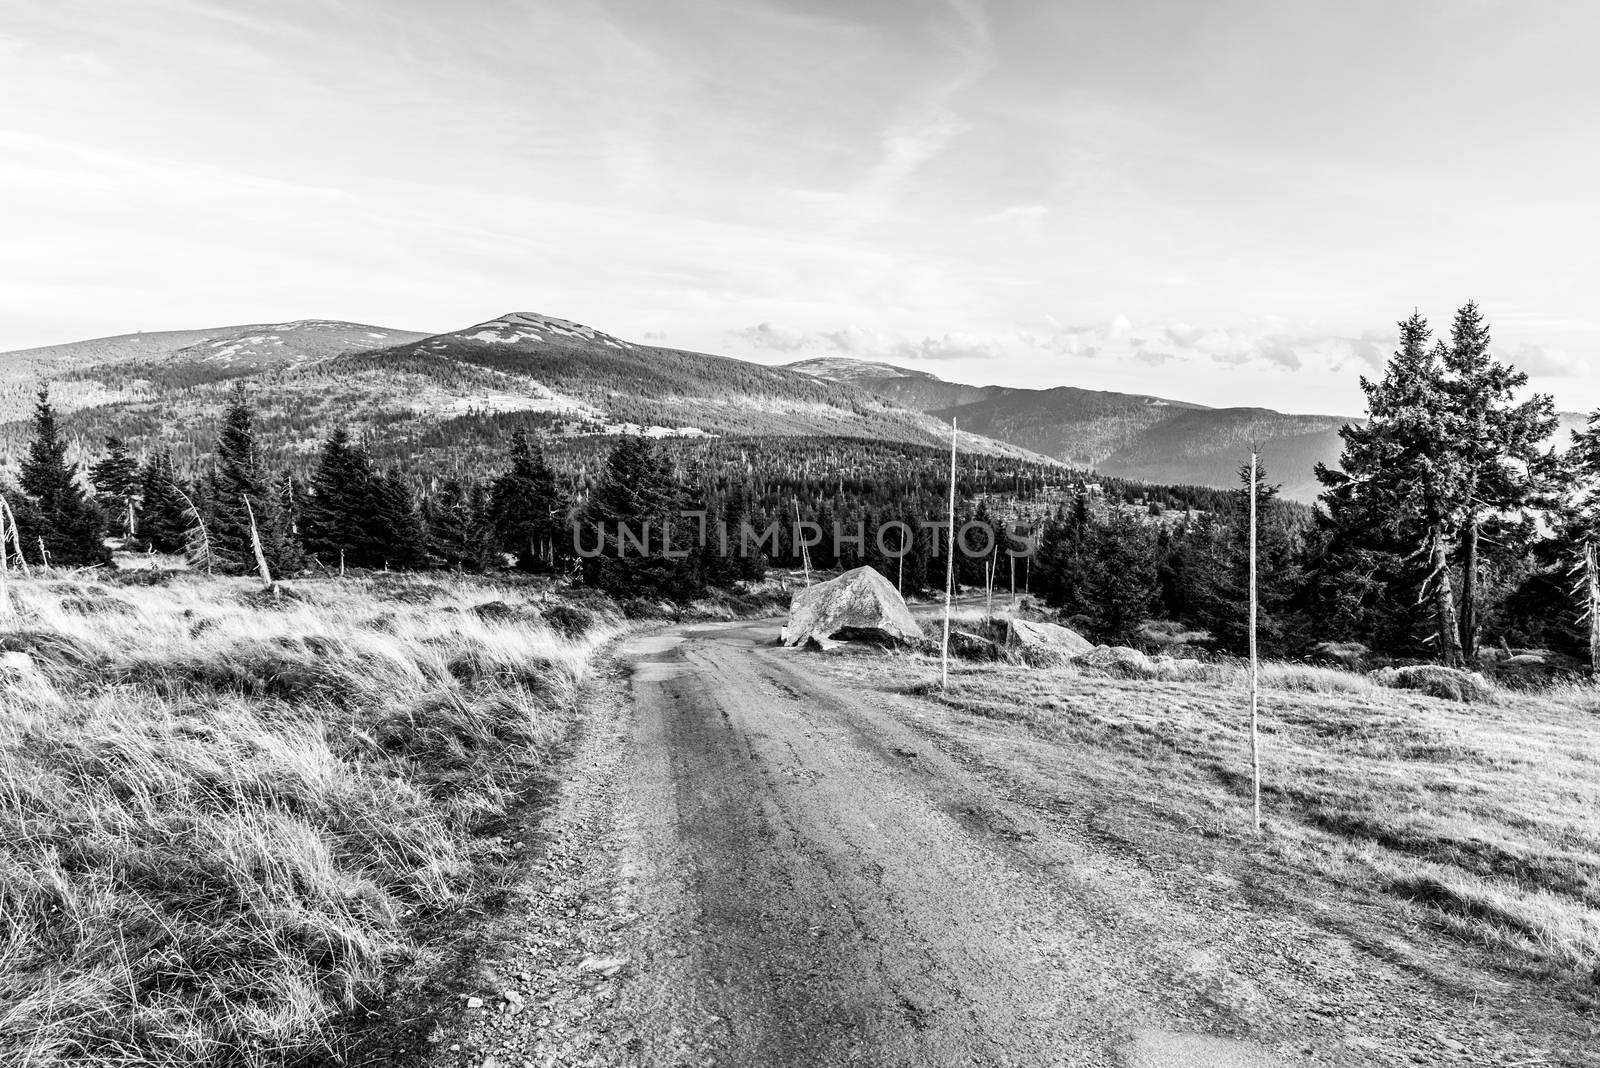 Tourist road in the middle of mountain landscape, Giant Mountains, Krkonose, Czech Republic by pyty